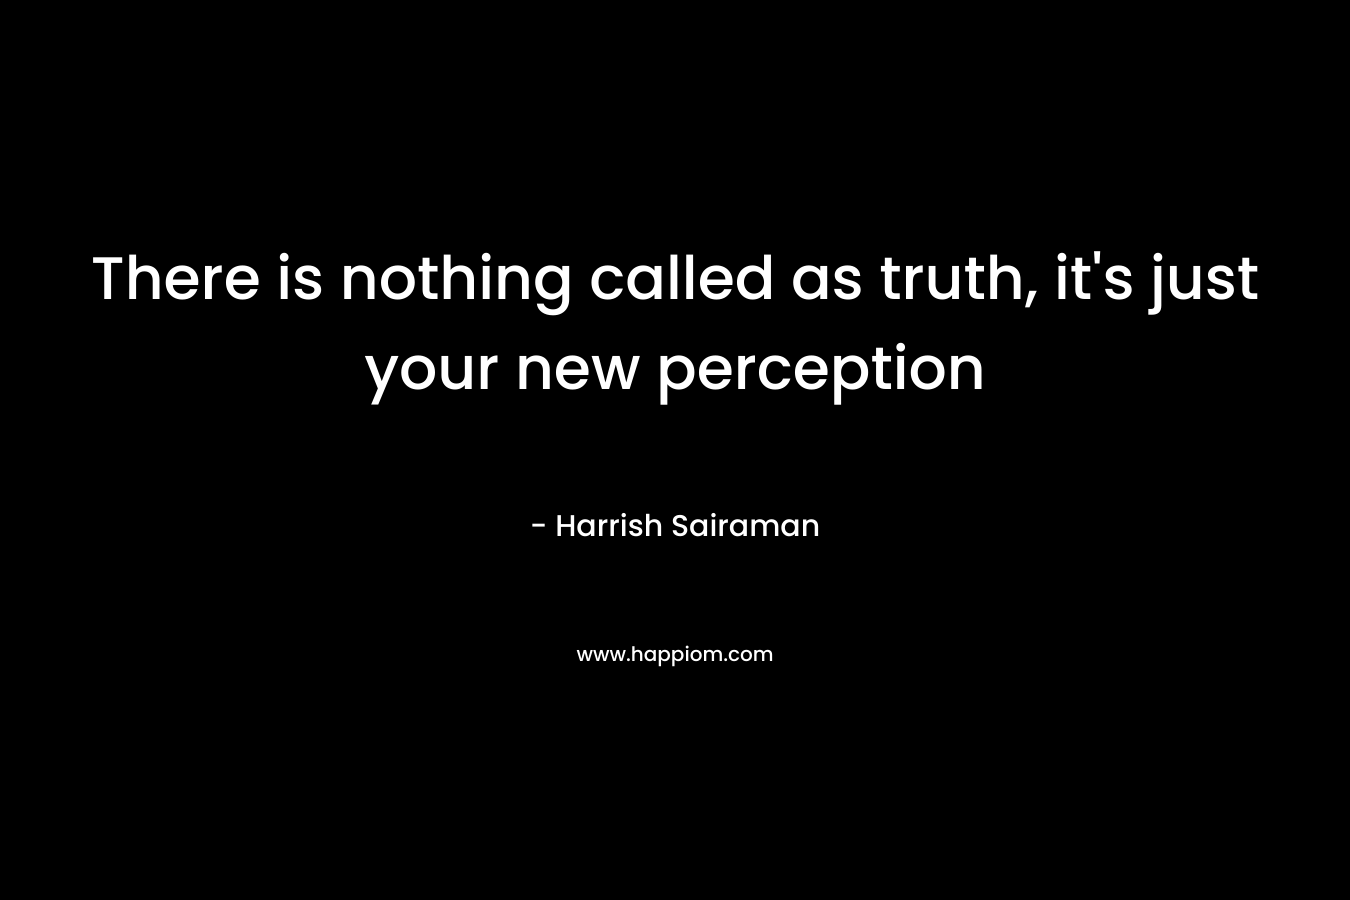 There is nothing called as truth, it's just your new perception